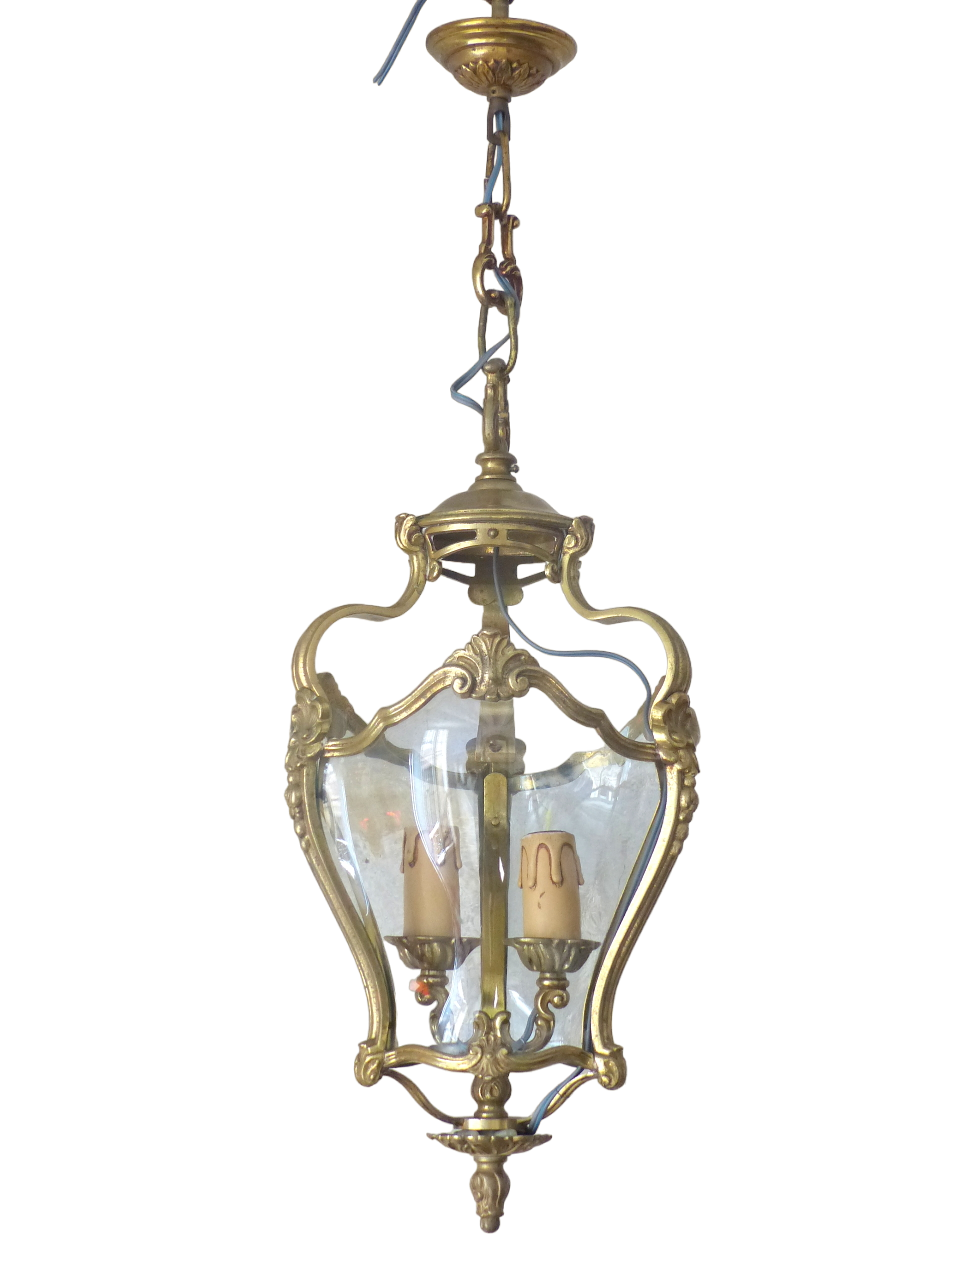 Charming Vintage French Hall Lantern Chandelier Ceiling Gilded Bronze Curved